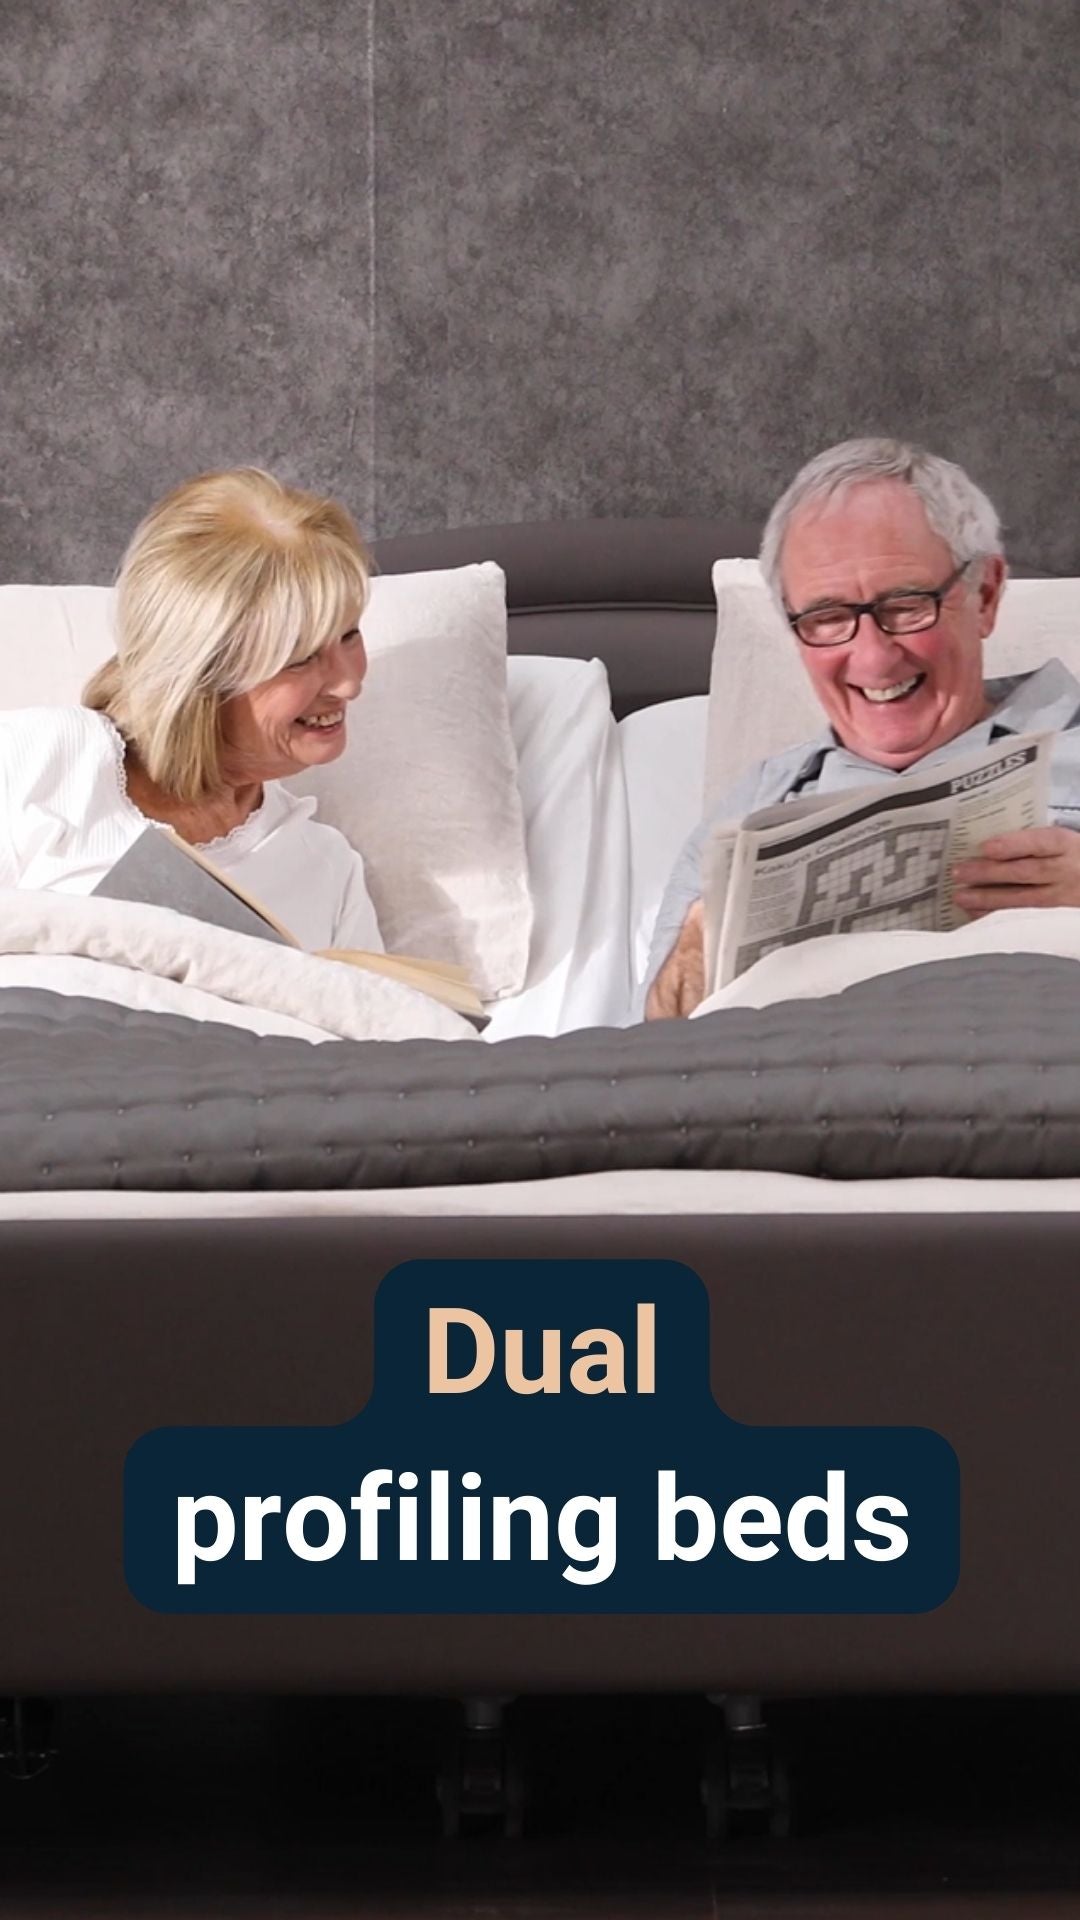 A couple sat smiling in a dual profiling bed with the caption 'Dual profiling beds'